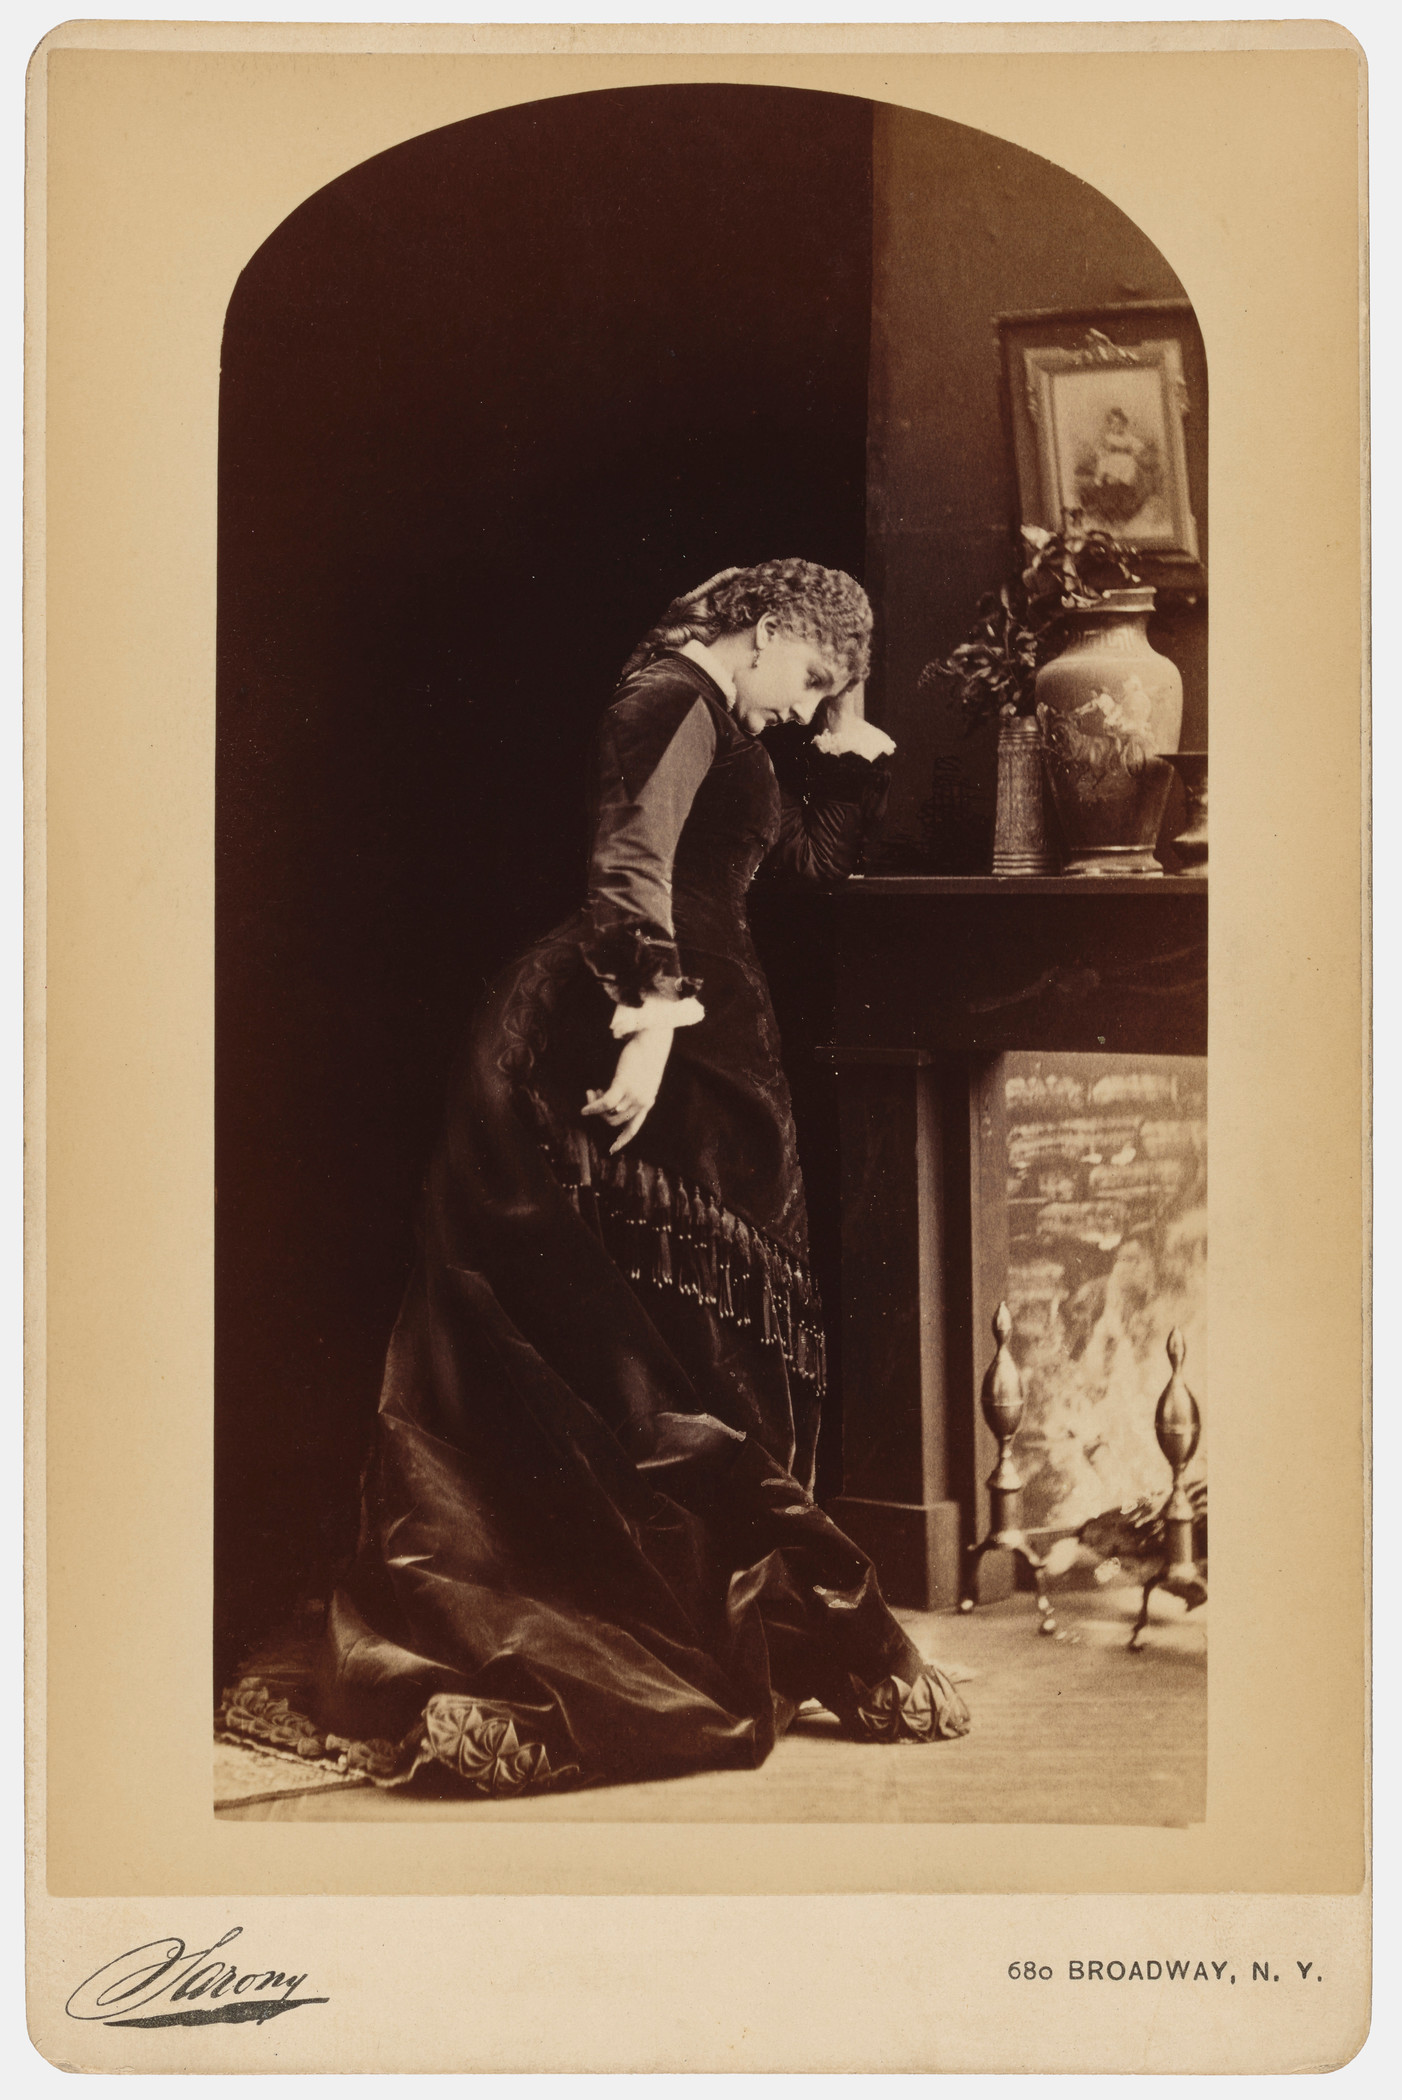 Woman wearing 19th century dress resting head in hand by a decorated mantle